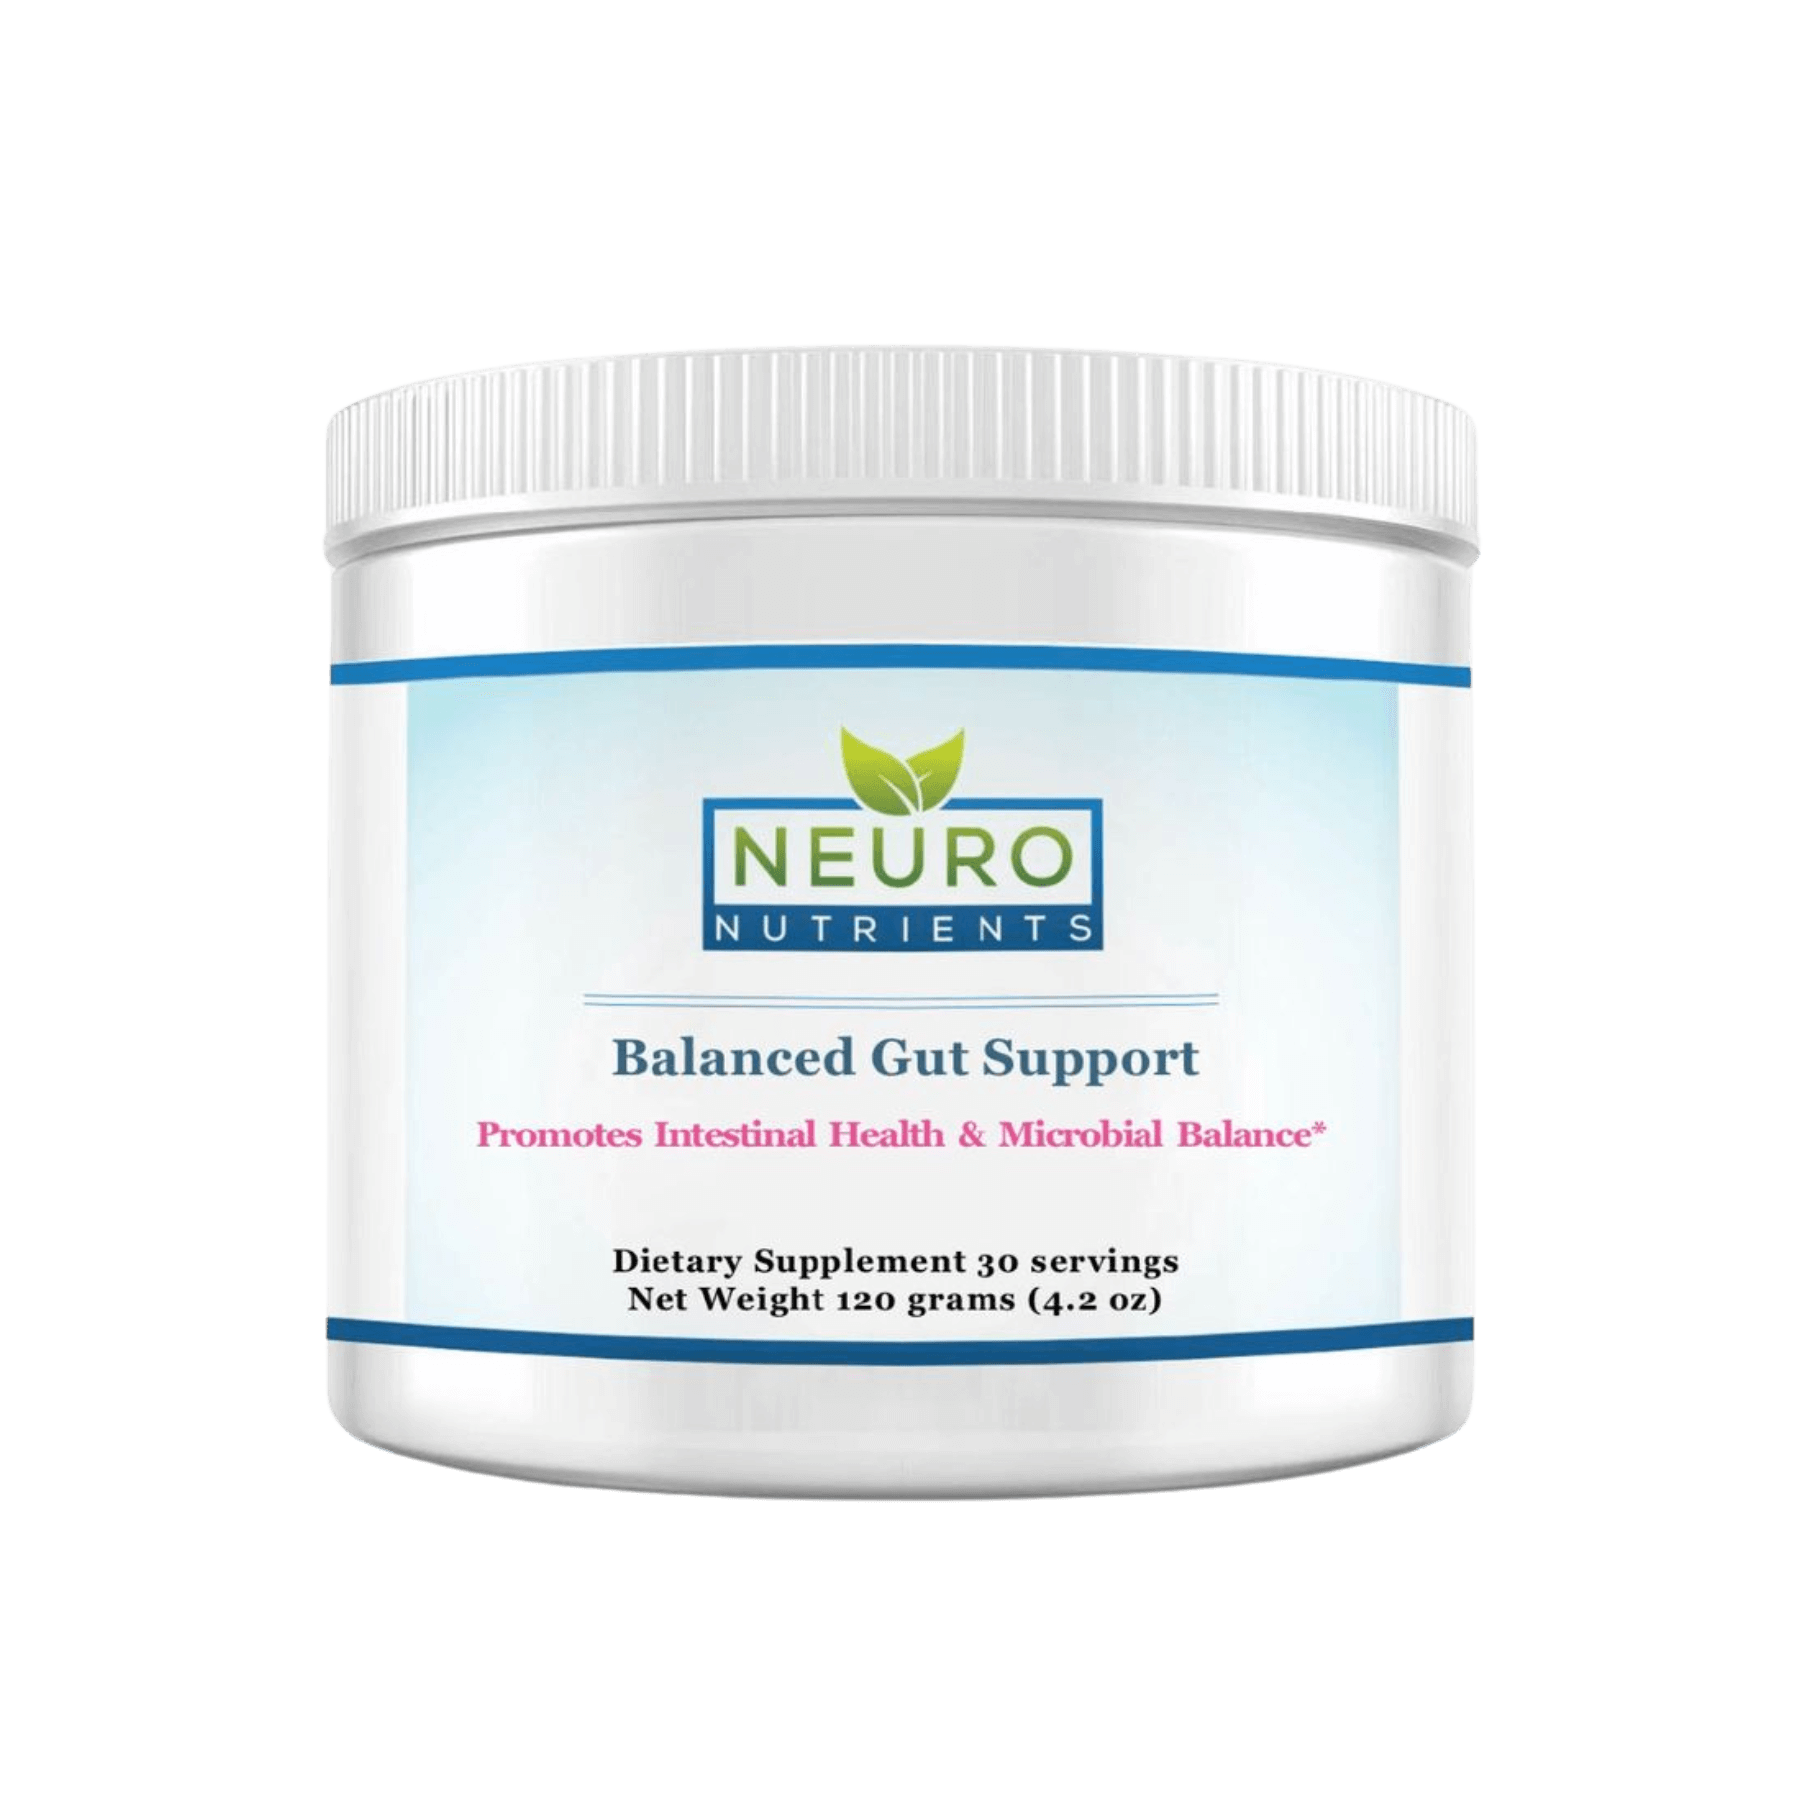 Image of Neuro Nutrients Balanced Gut support powder container